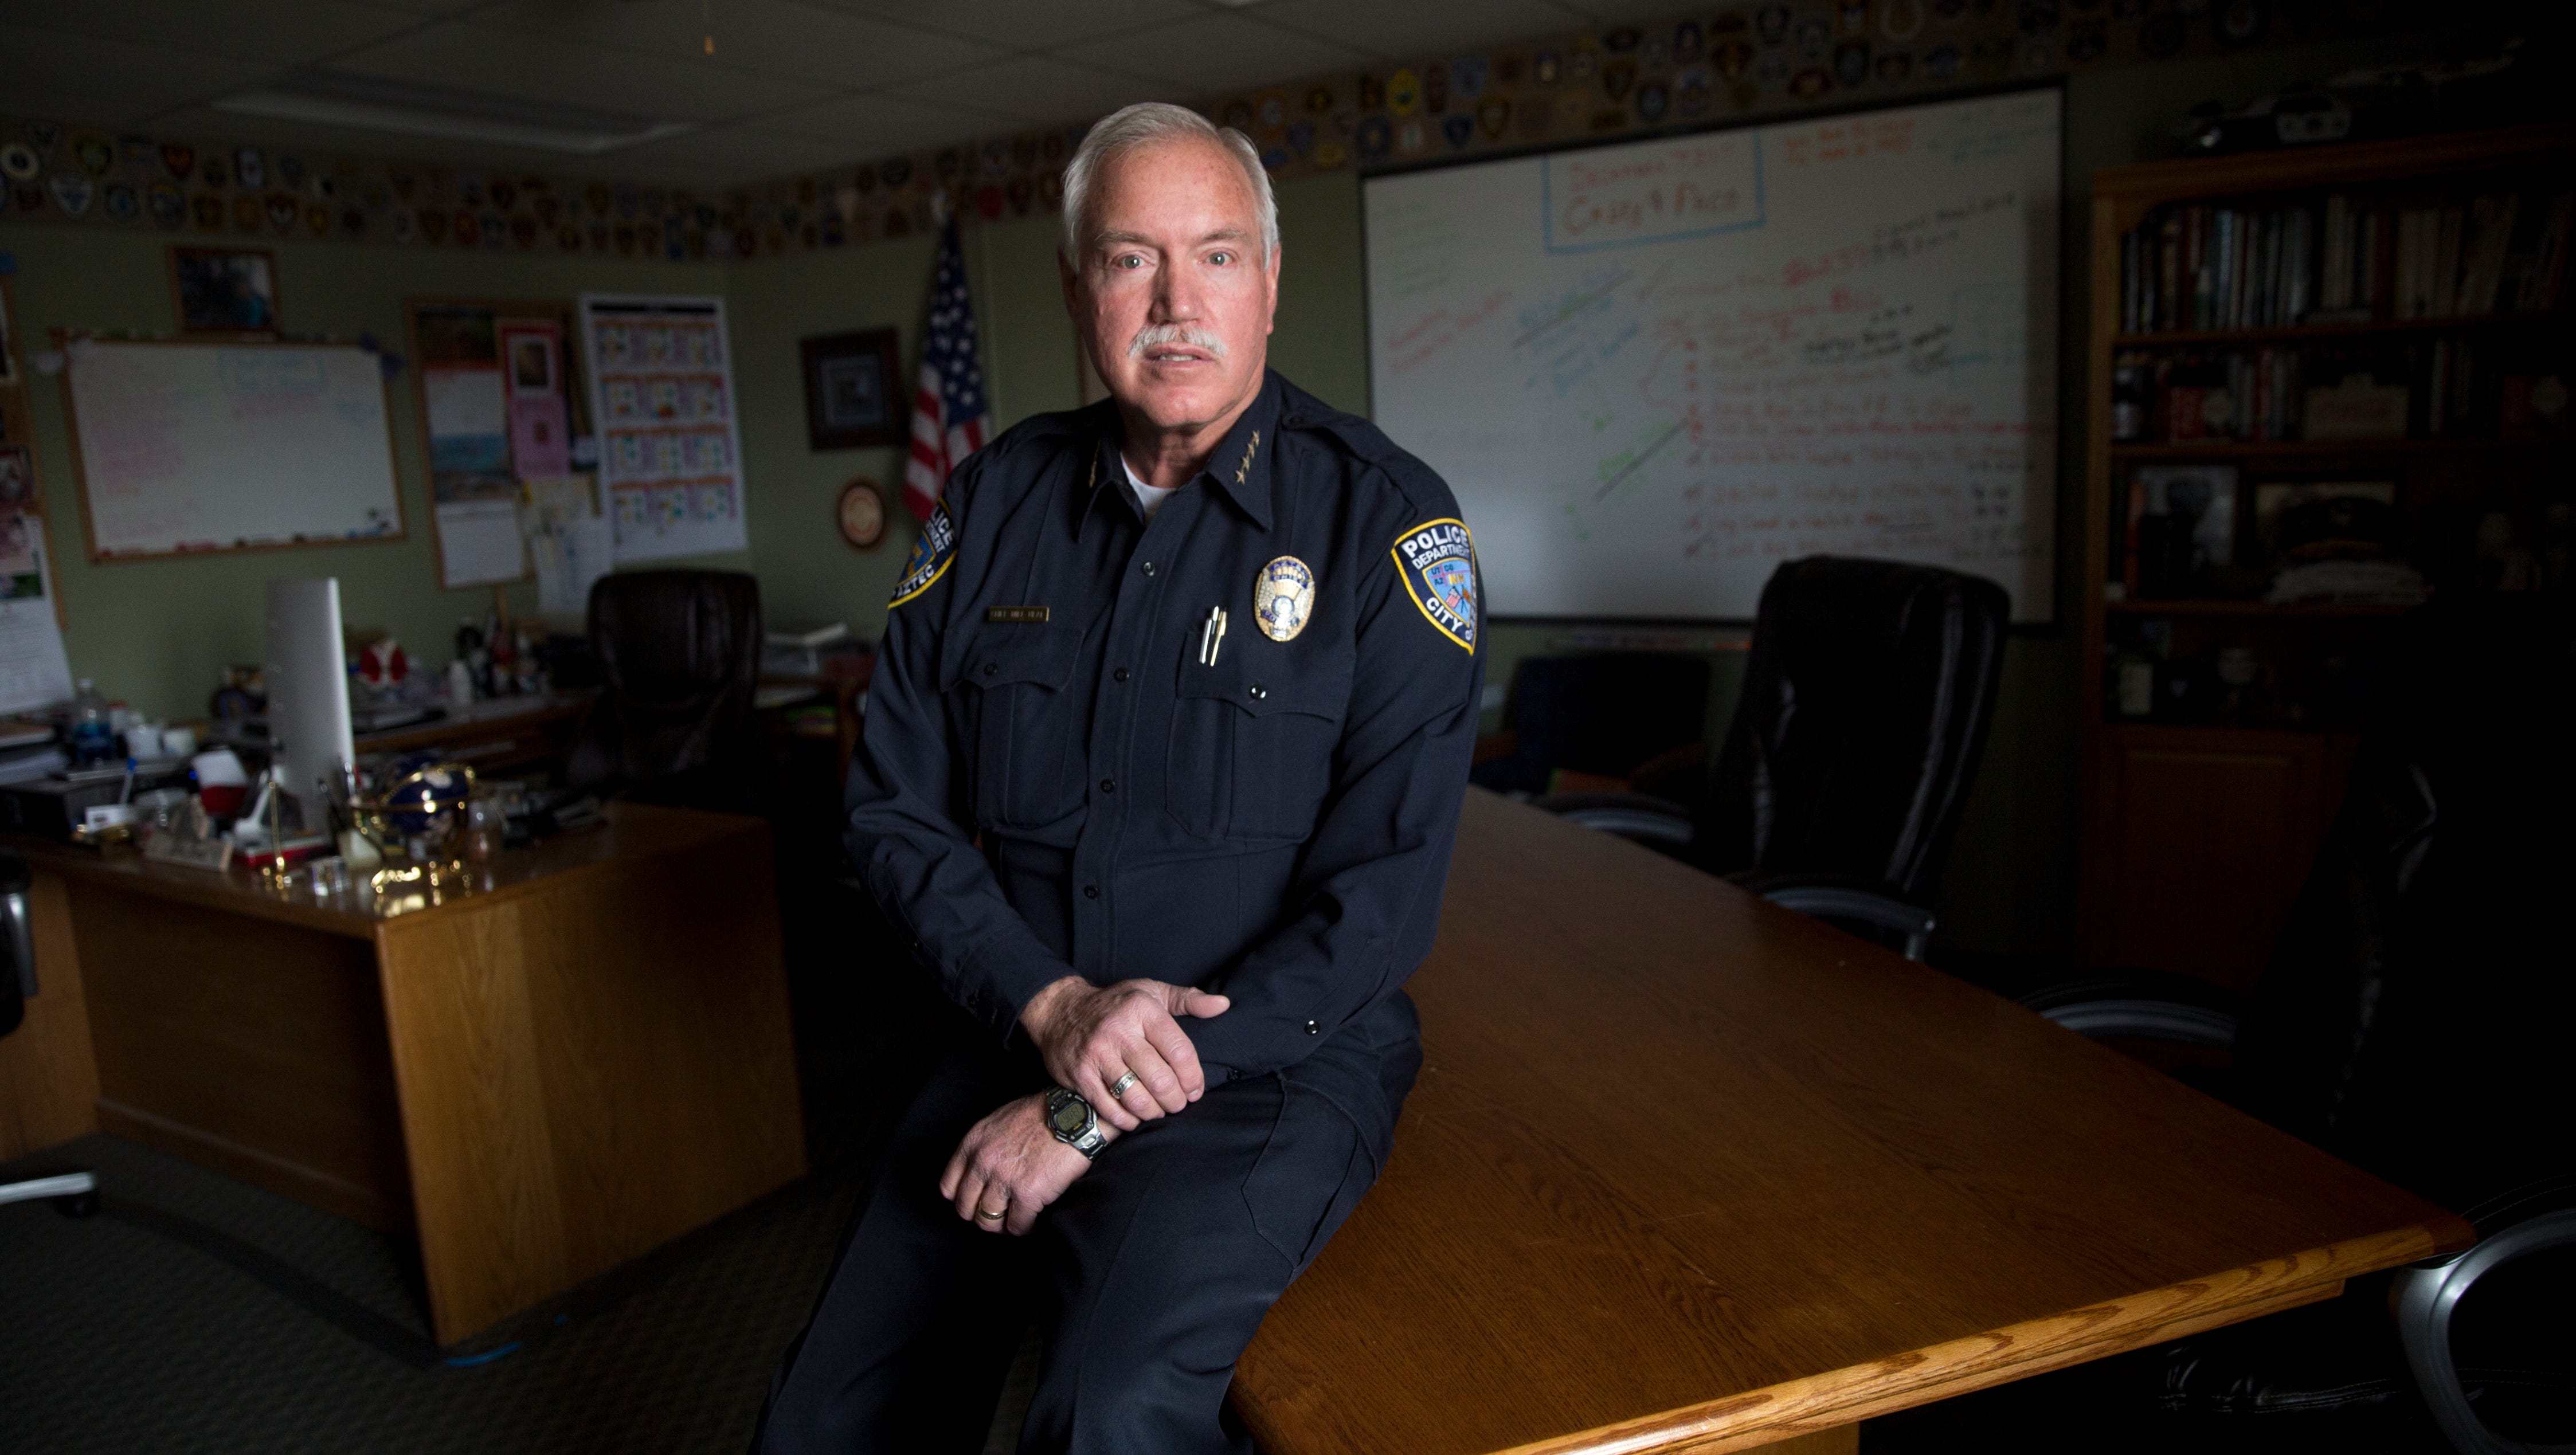 Aztec Police Chief Mike Heal has been speaking to state legislators about his experience with the Aztec High School shooting and advocating for more funds for school safety.